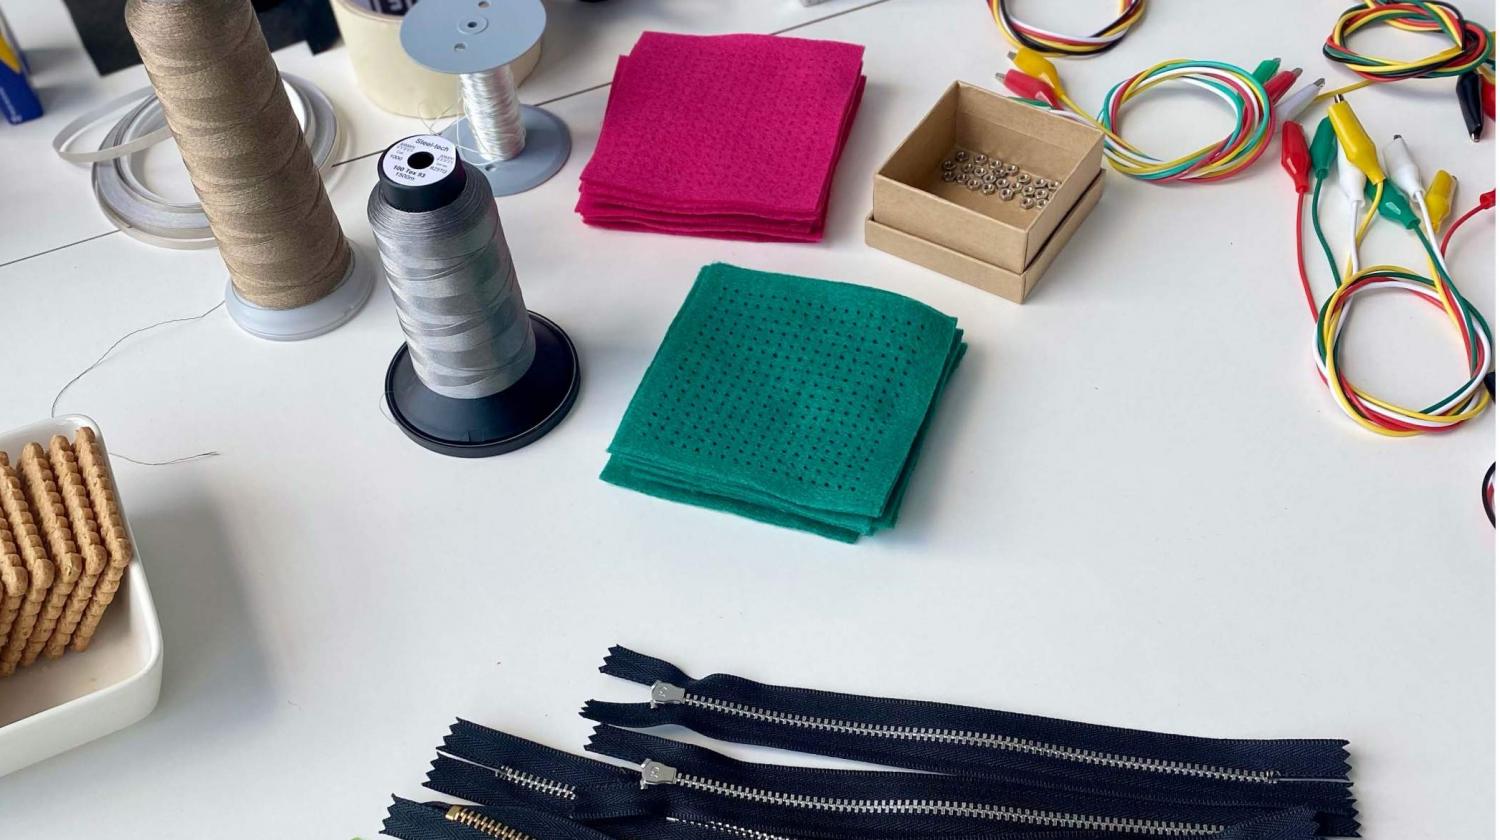 Tools, fabrics, and zippers displayed on the lab table.